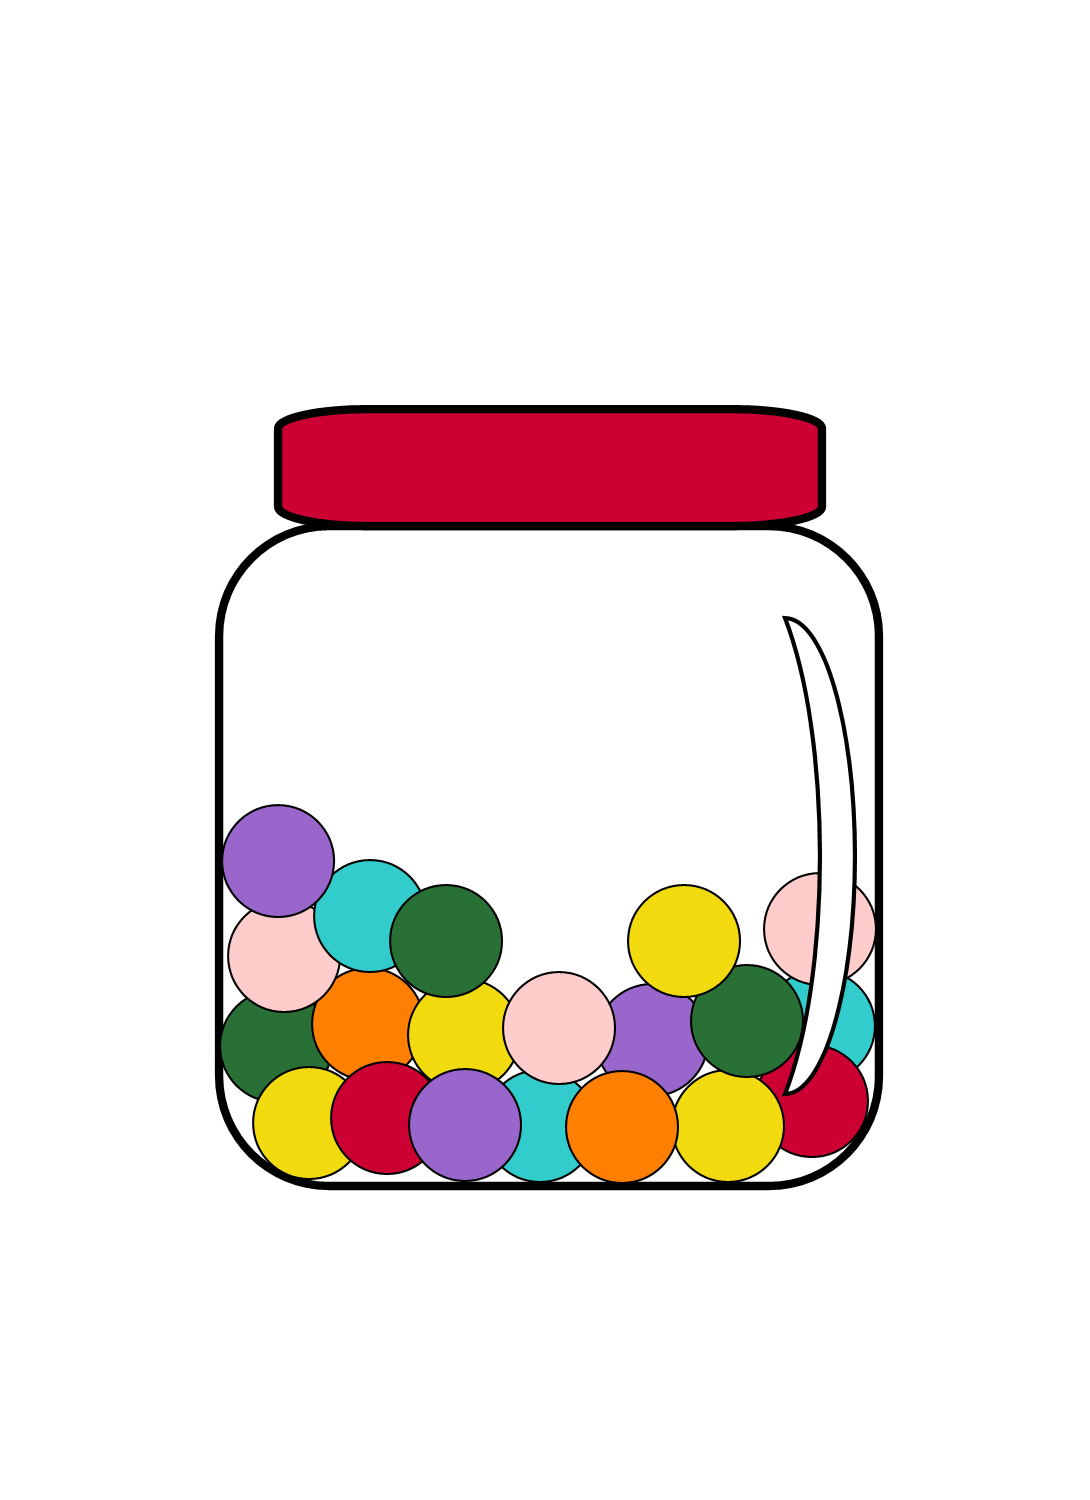 Free Clipart N Images: Free Clip Art ~ Candy Jar - ClipArt Best ...